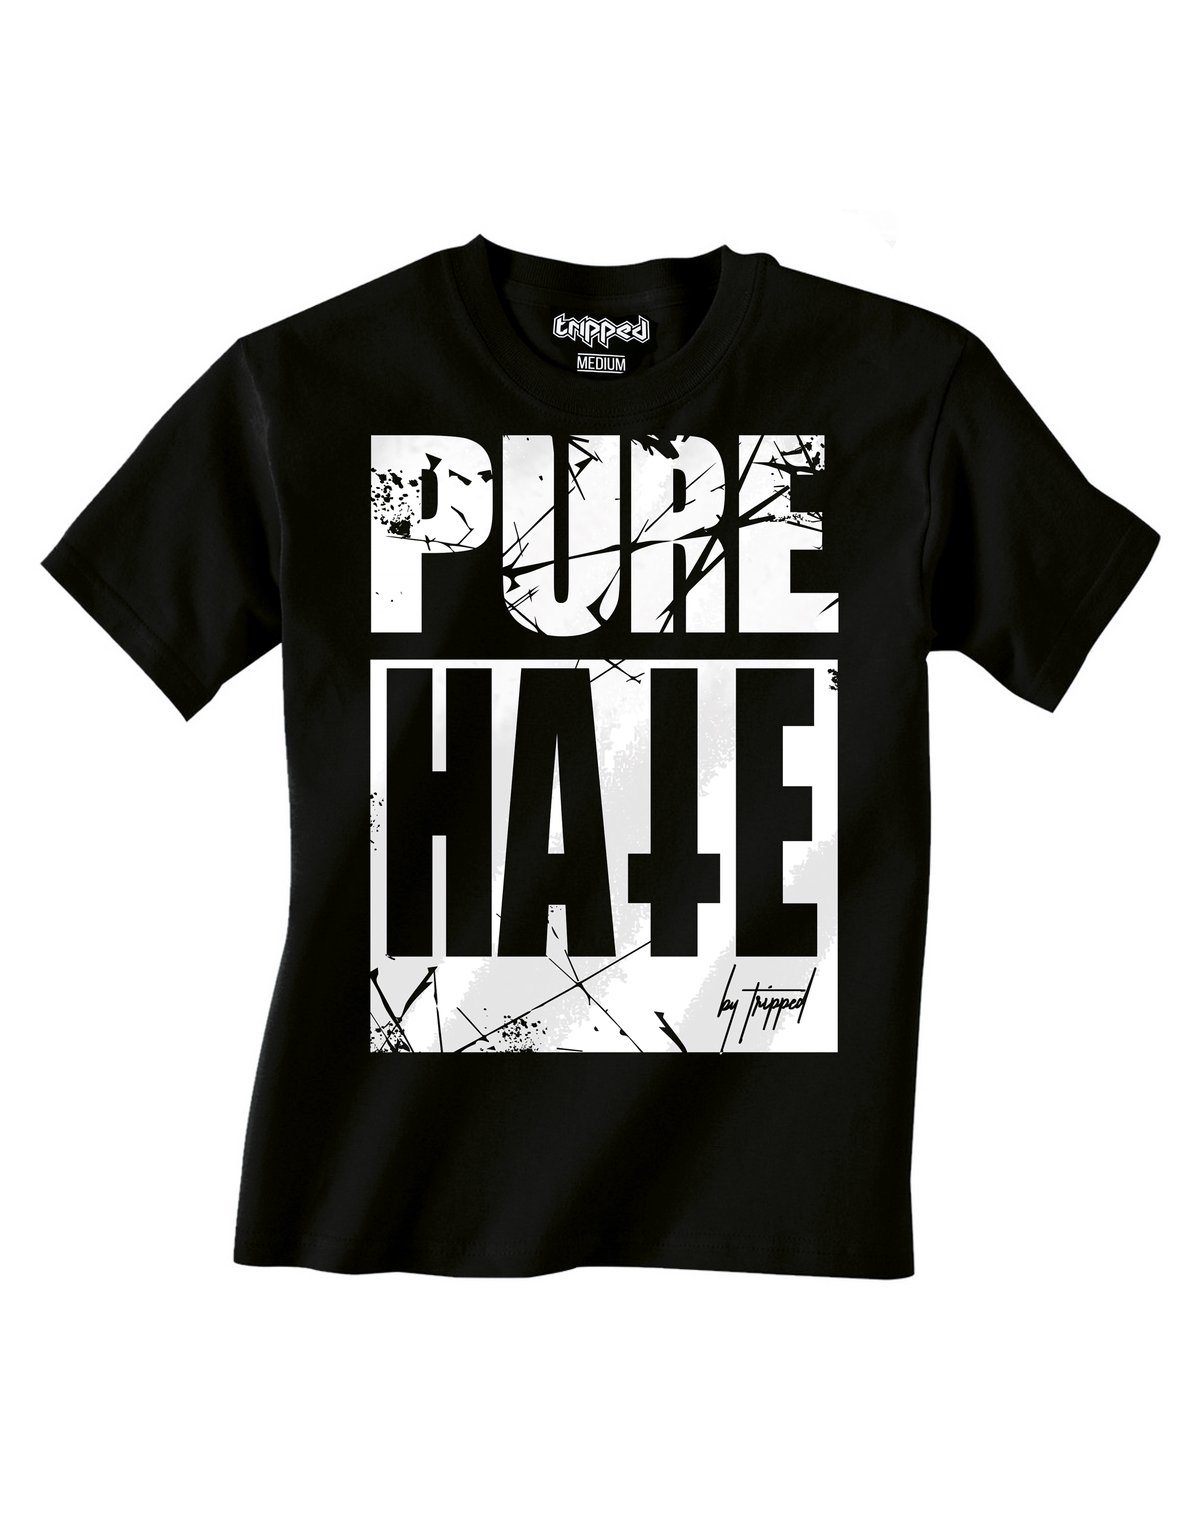 Image of Pure Hate shirt by Tripped - Black